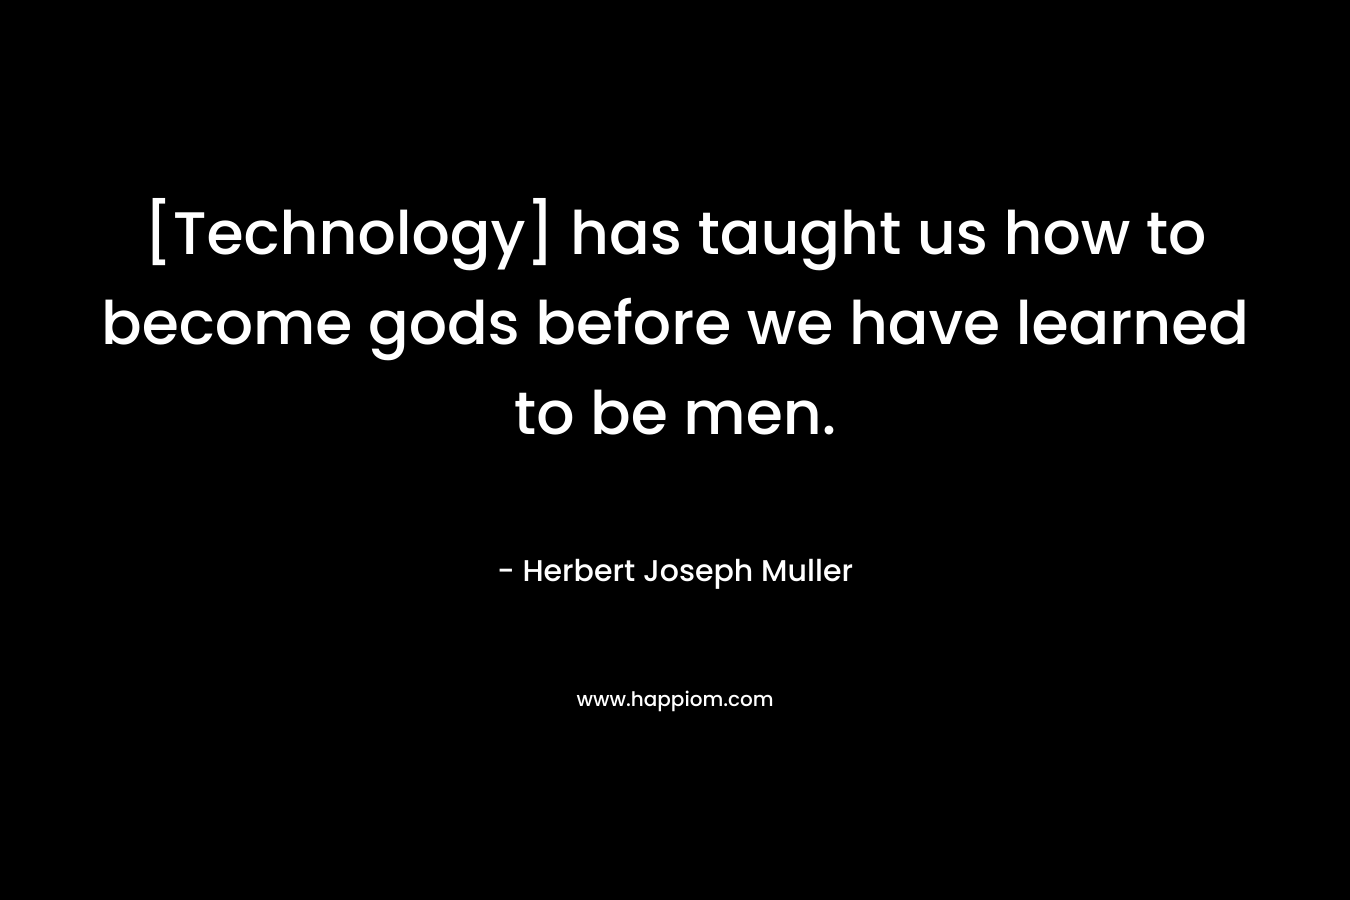 [Technology] has taught us how to become gods before we have learned to be men. – Herbert Joseph Muller